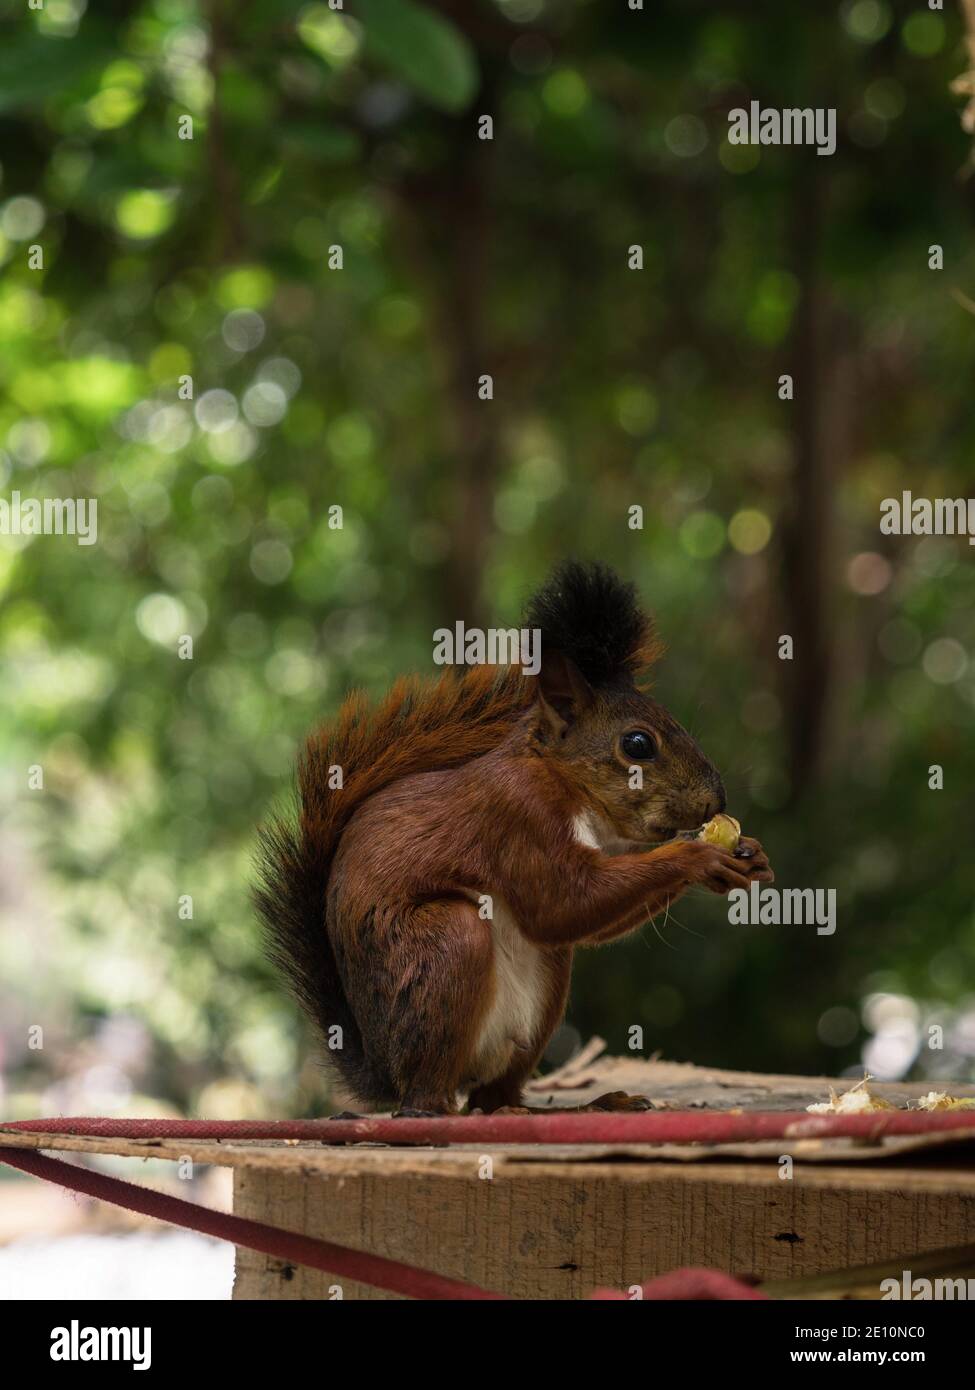 Red-tailed squirrel rodent eating in Parque Centenario park in Cartagena de Indias Bolivar Colombia in Latin South America Stock Photo